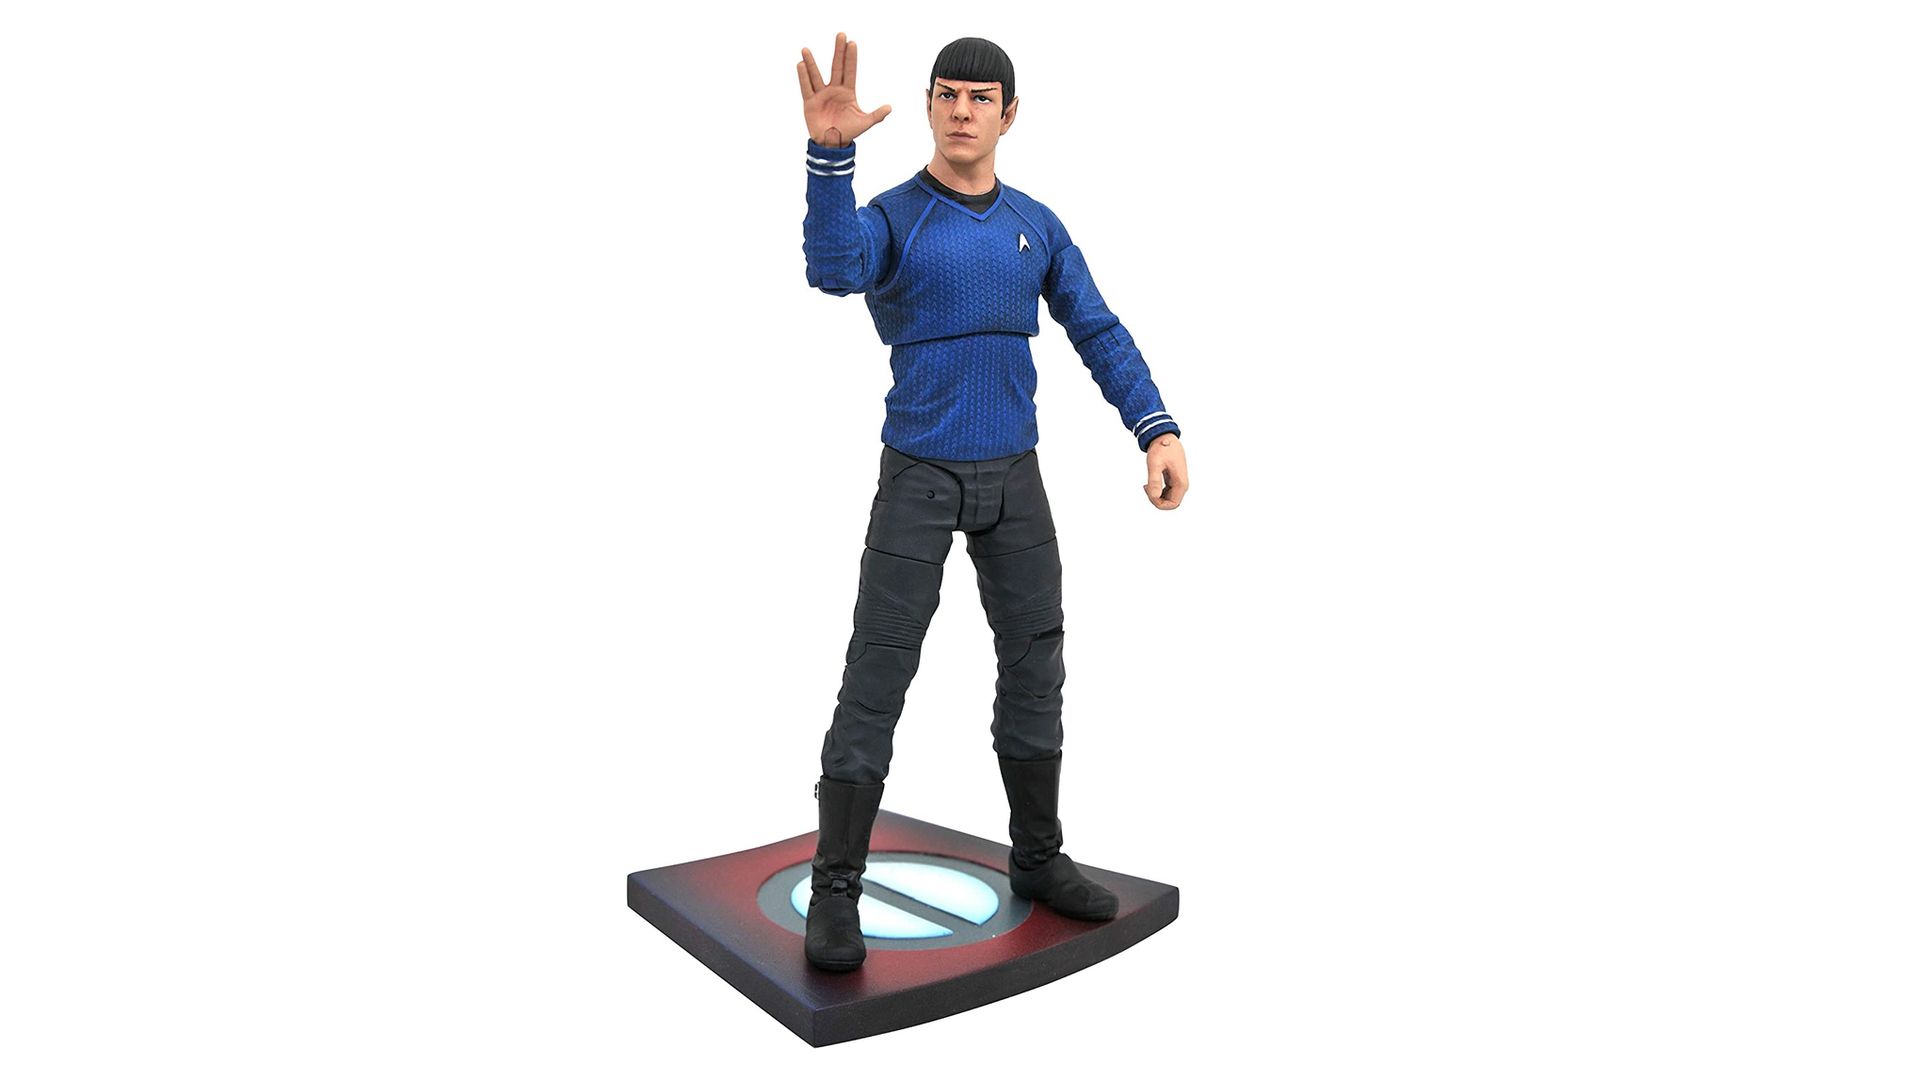 Spock Action figure on white background.